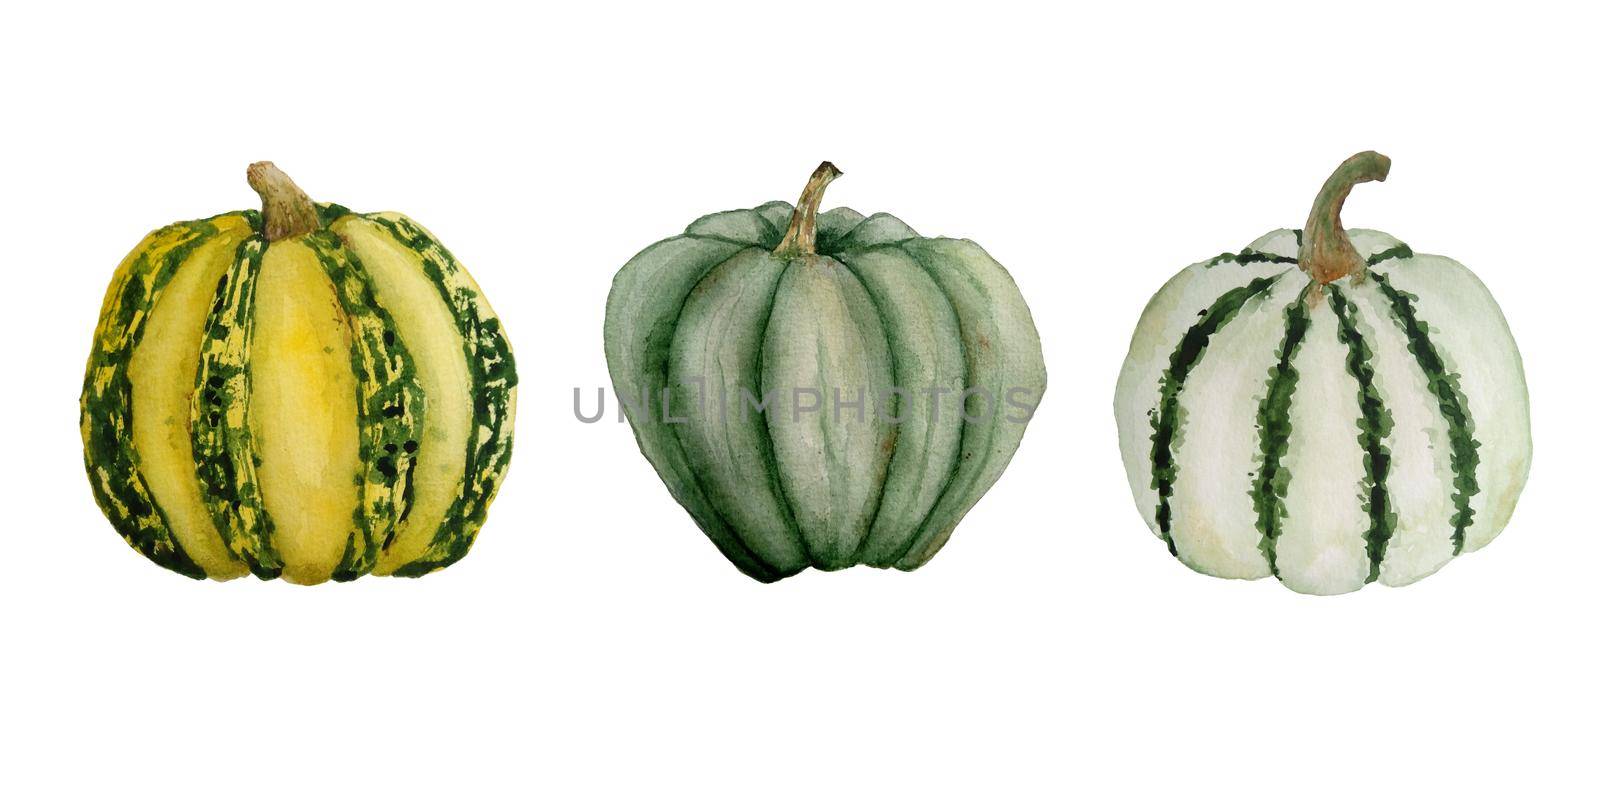 Watercolor hand drawn illustration template elemnts with green yellow striped pumpkins, organic farmers food ingridient. Halloween thanksgiving celebration design. Decoration autumn fall harvest label. by Lagmar